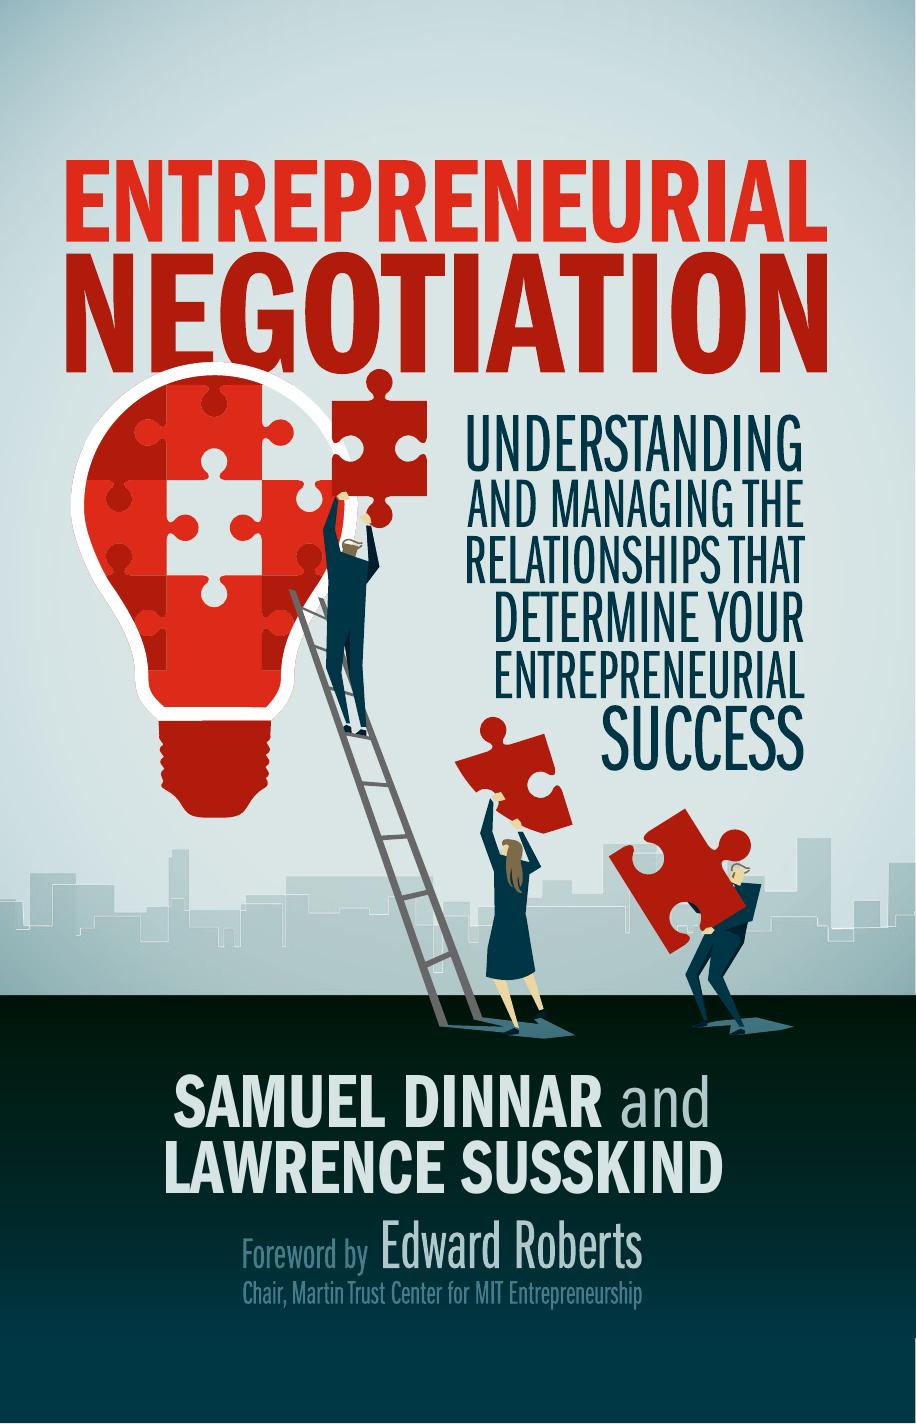 Entrepreneurial Negotiation  Understanding and Managing the Relationships that Determine Your Entrepreneurial Success, 2019